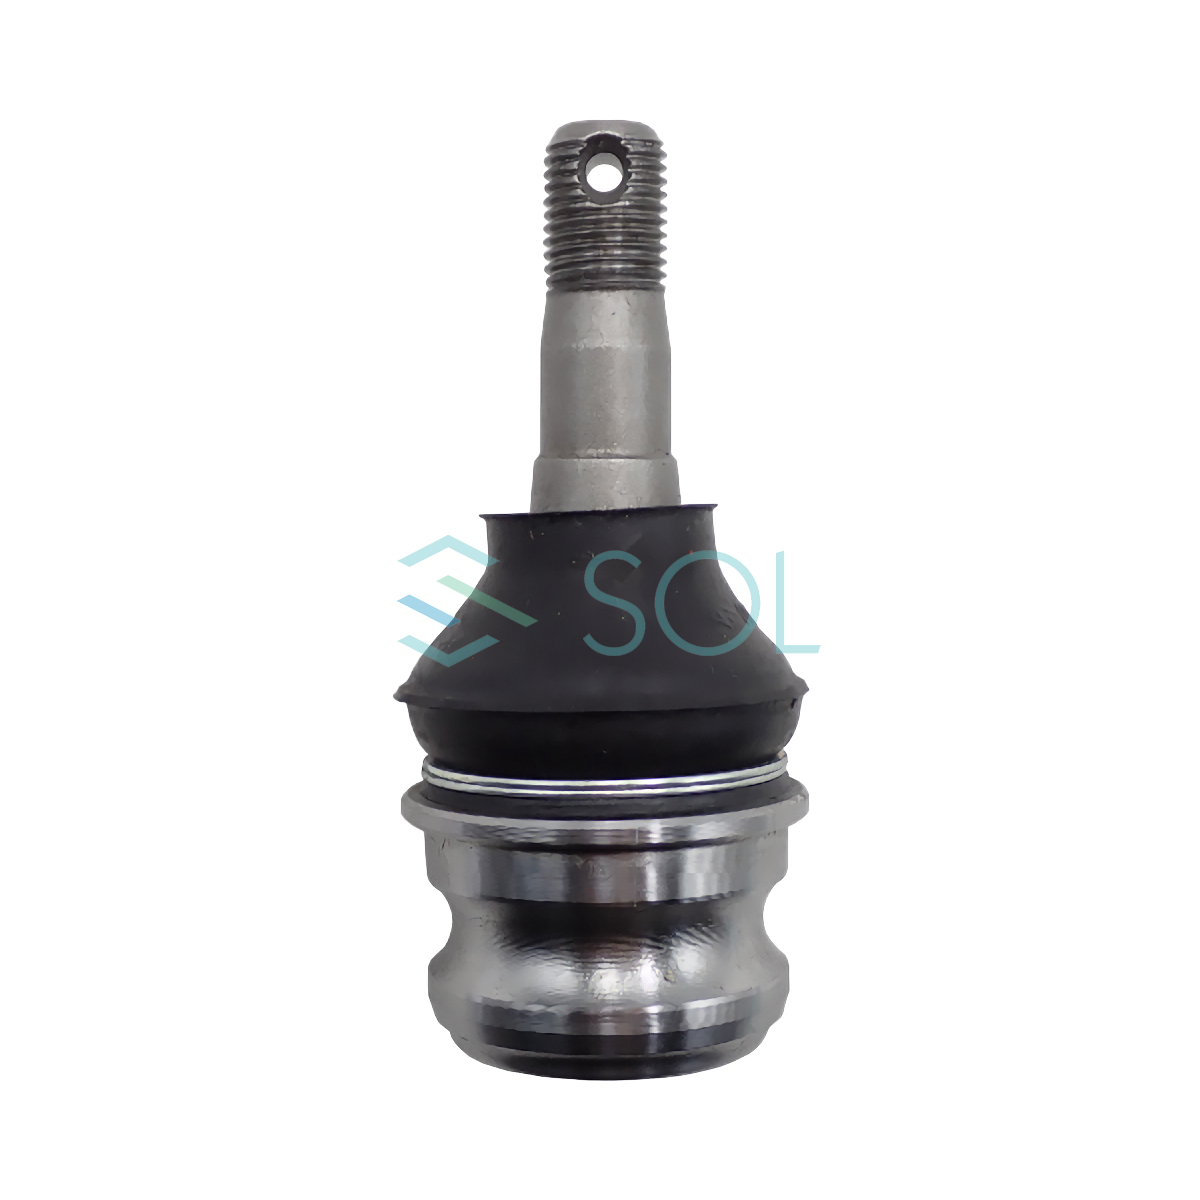  Leone AA2 ball joint left right common one side 555 three . industry s Lee five SB-6612 7210-67004 18 o'clock till the same day shipping 